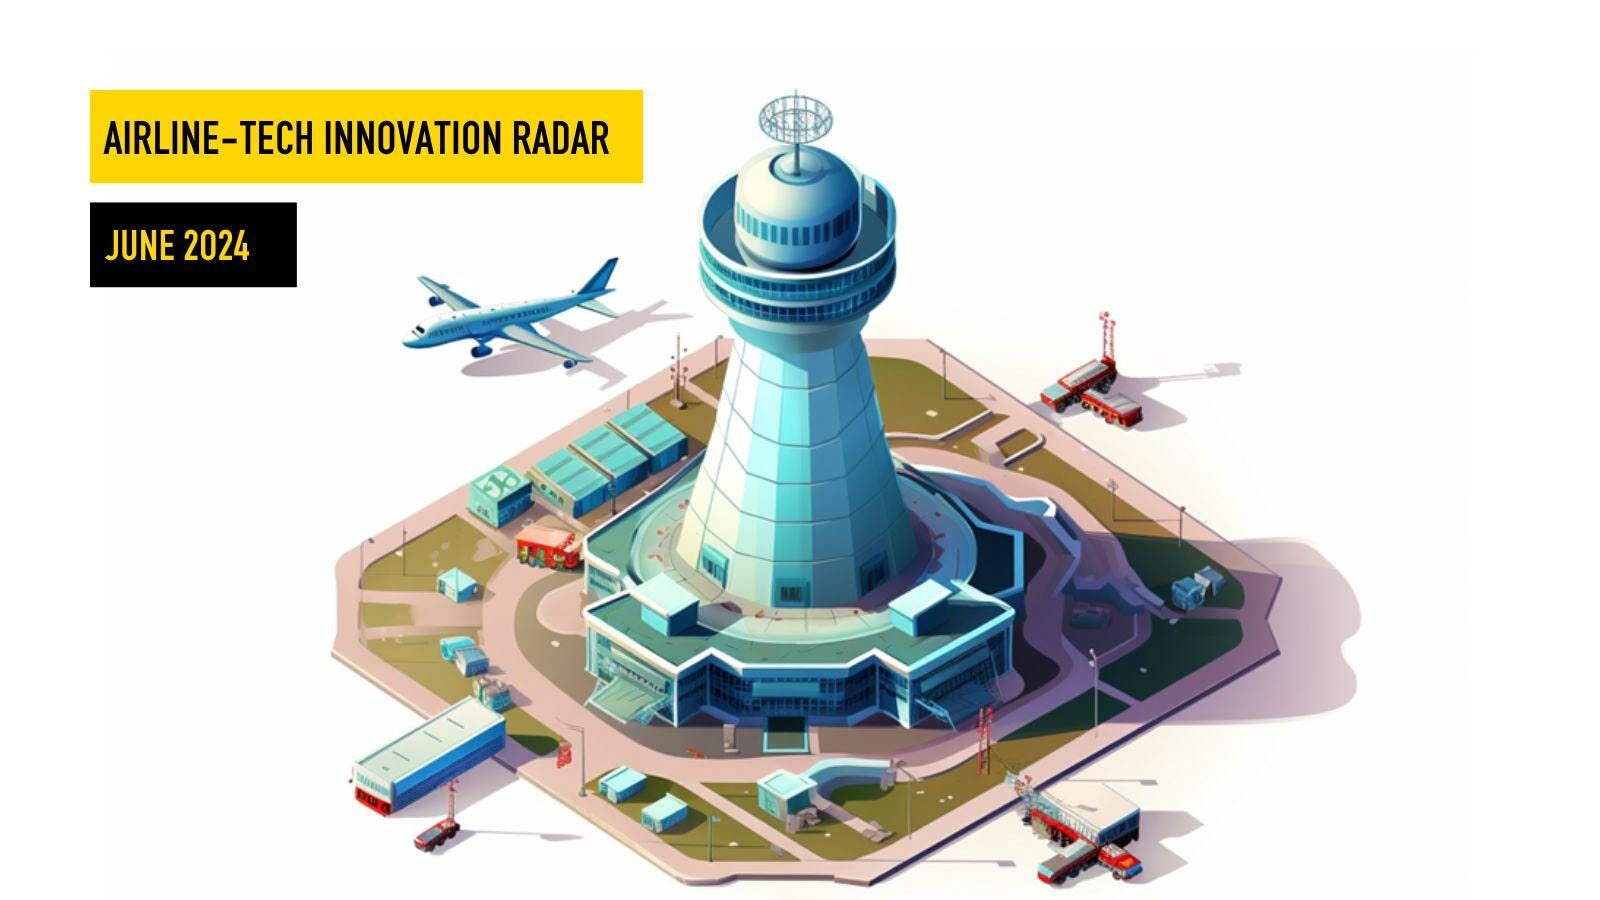 June’s Top Airline-Tech Innovations